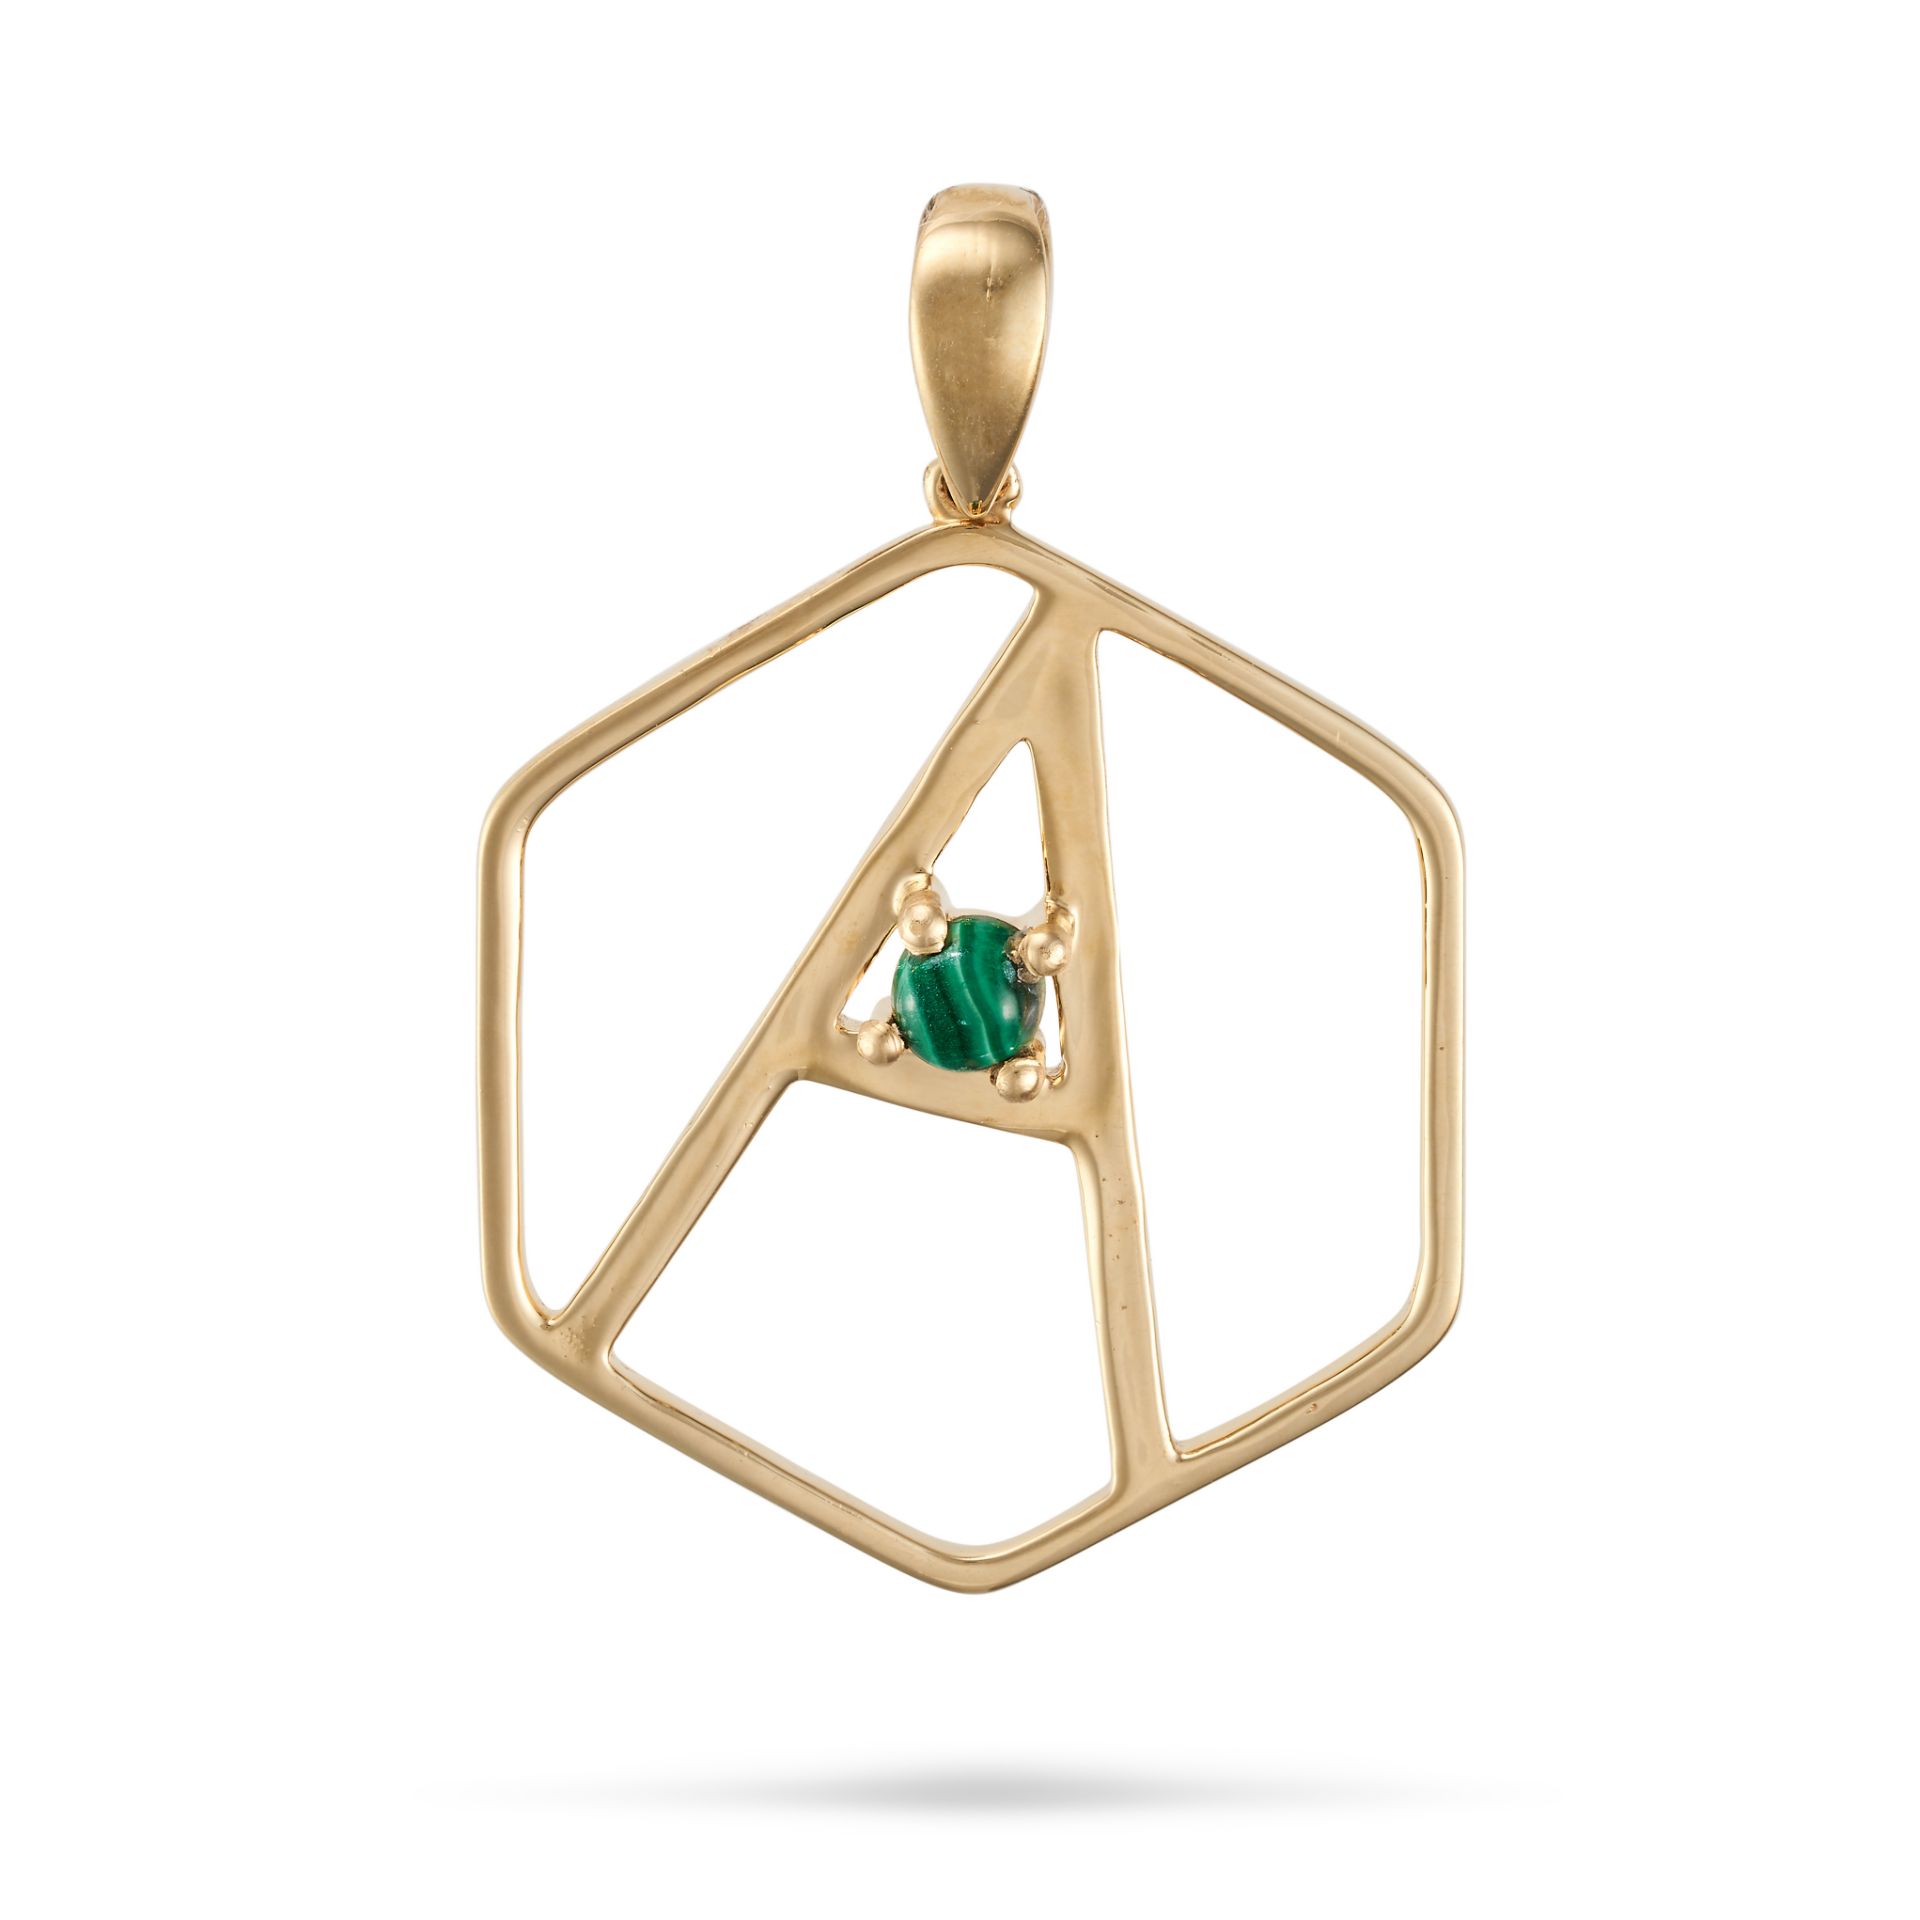 A MALACHITE PENDANT designed as the initial 'A' set with a cabochon malachite in a hexagonal bord...